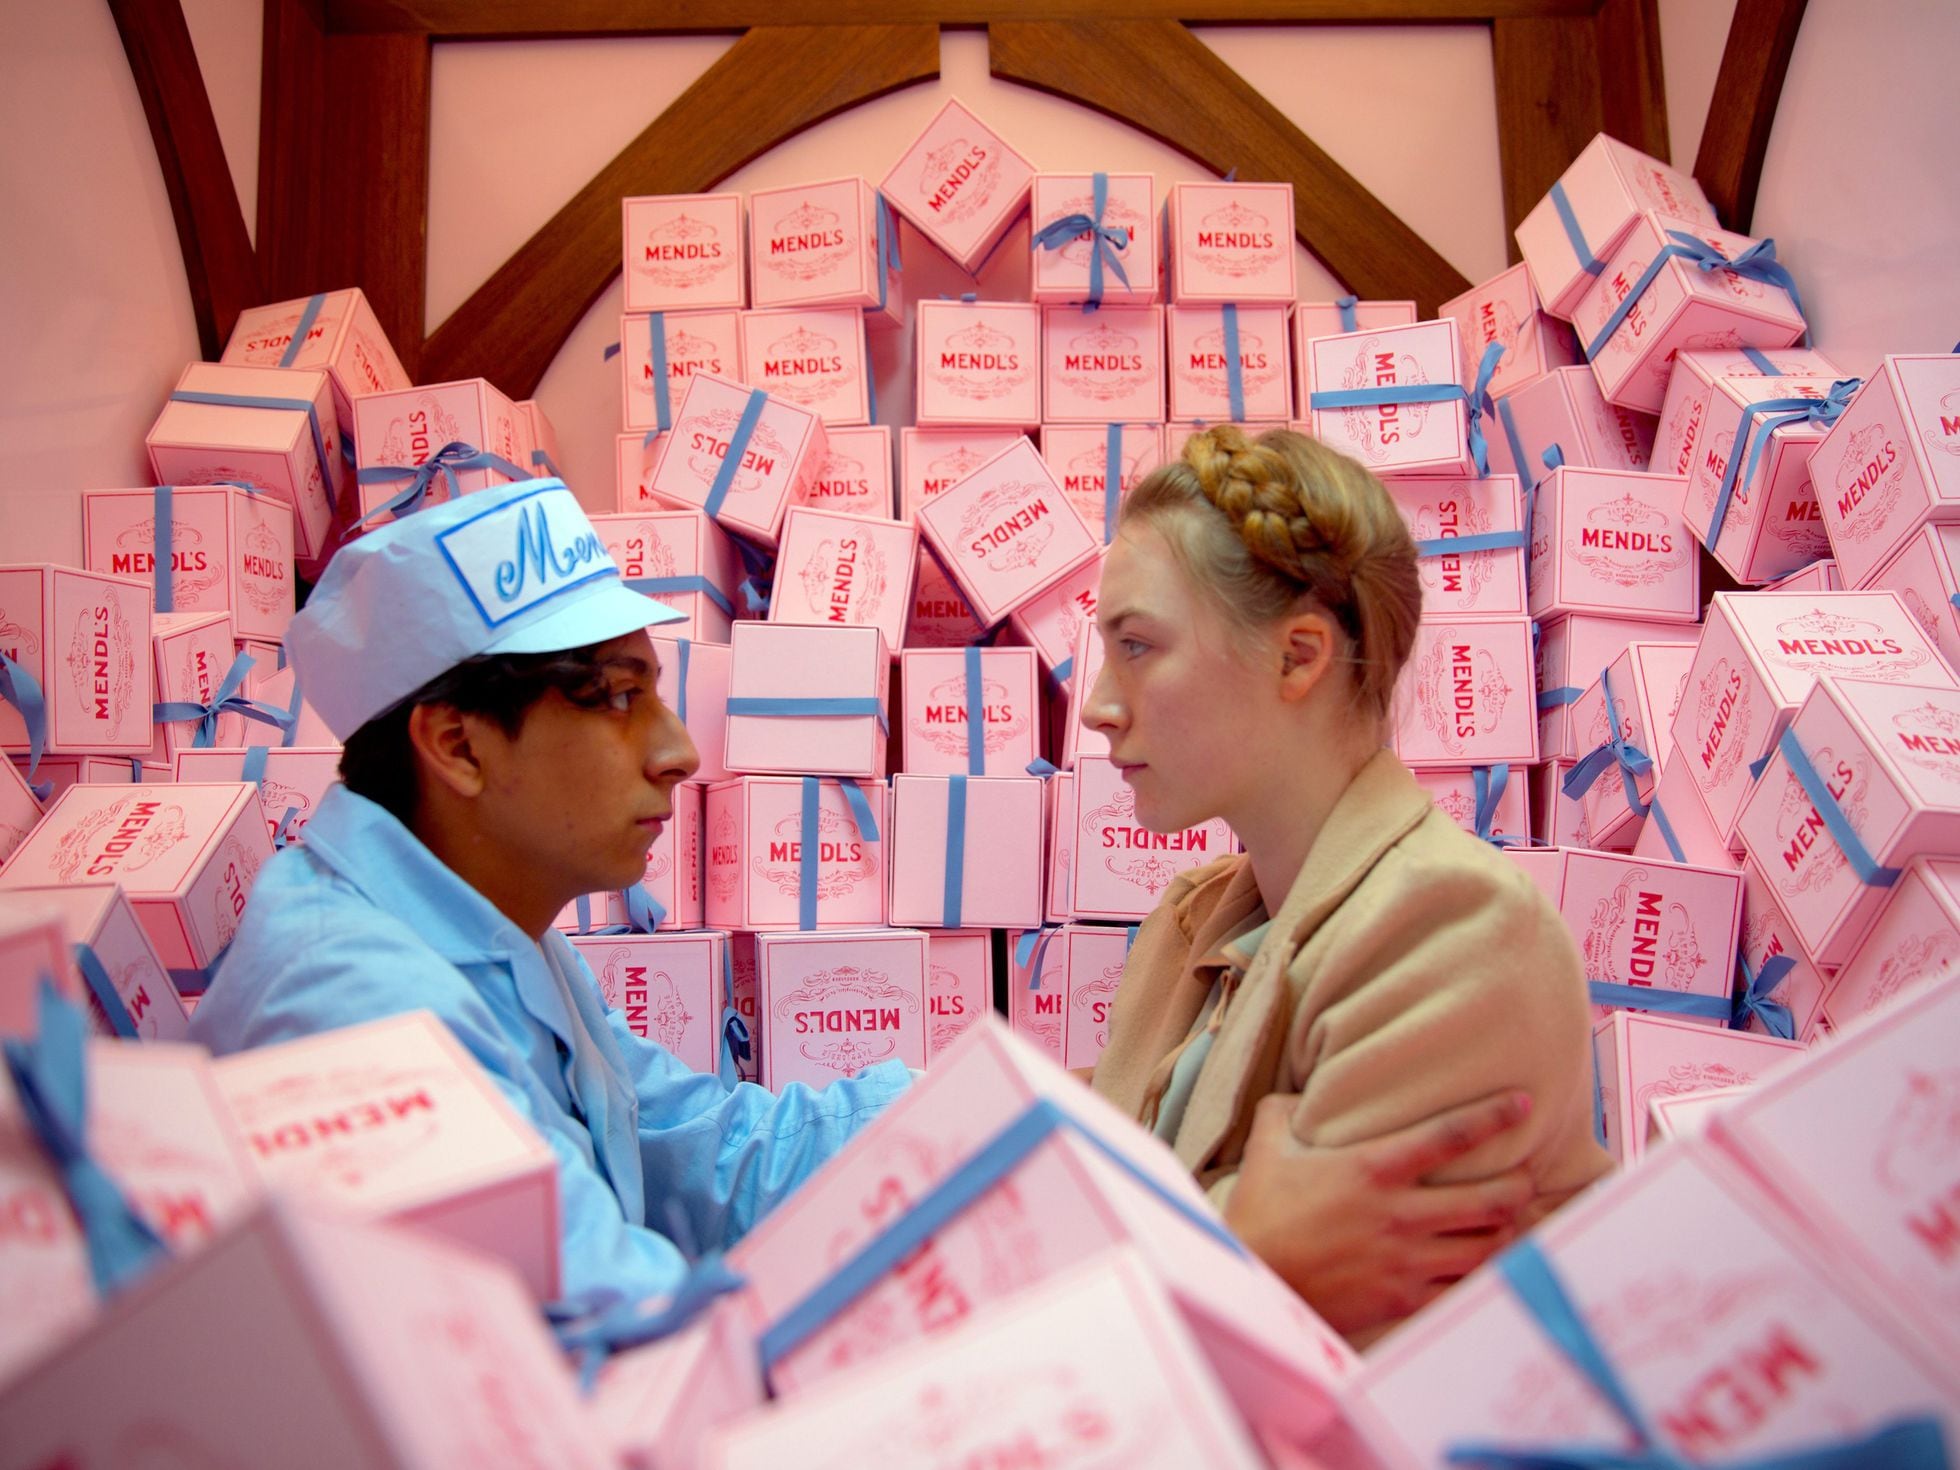 People film their lives in the style of a Wes Anderson movie